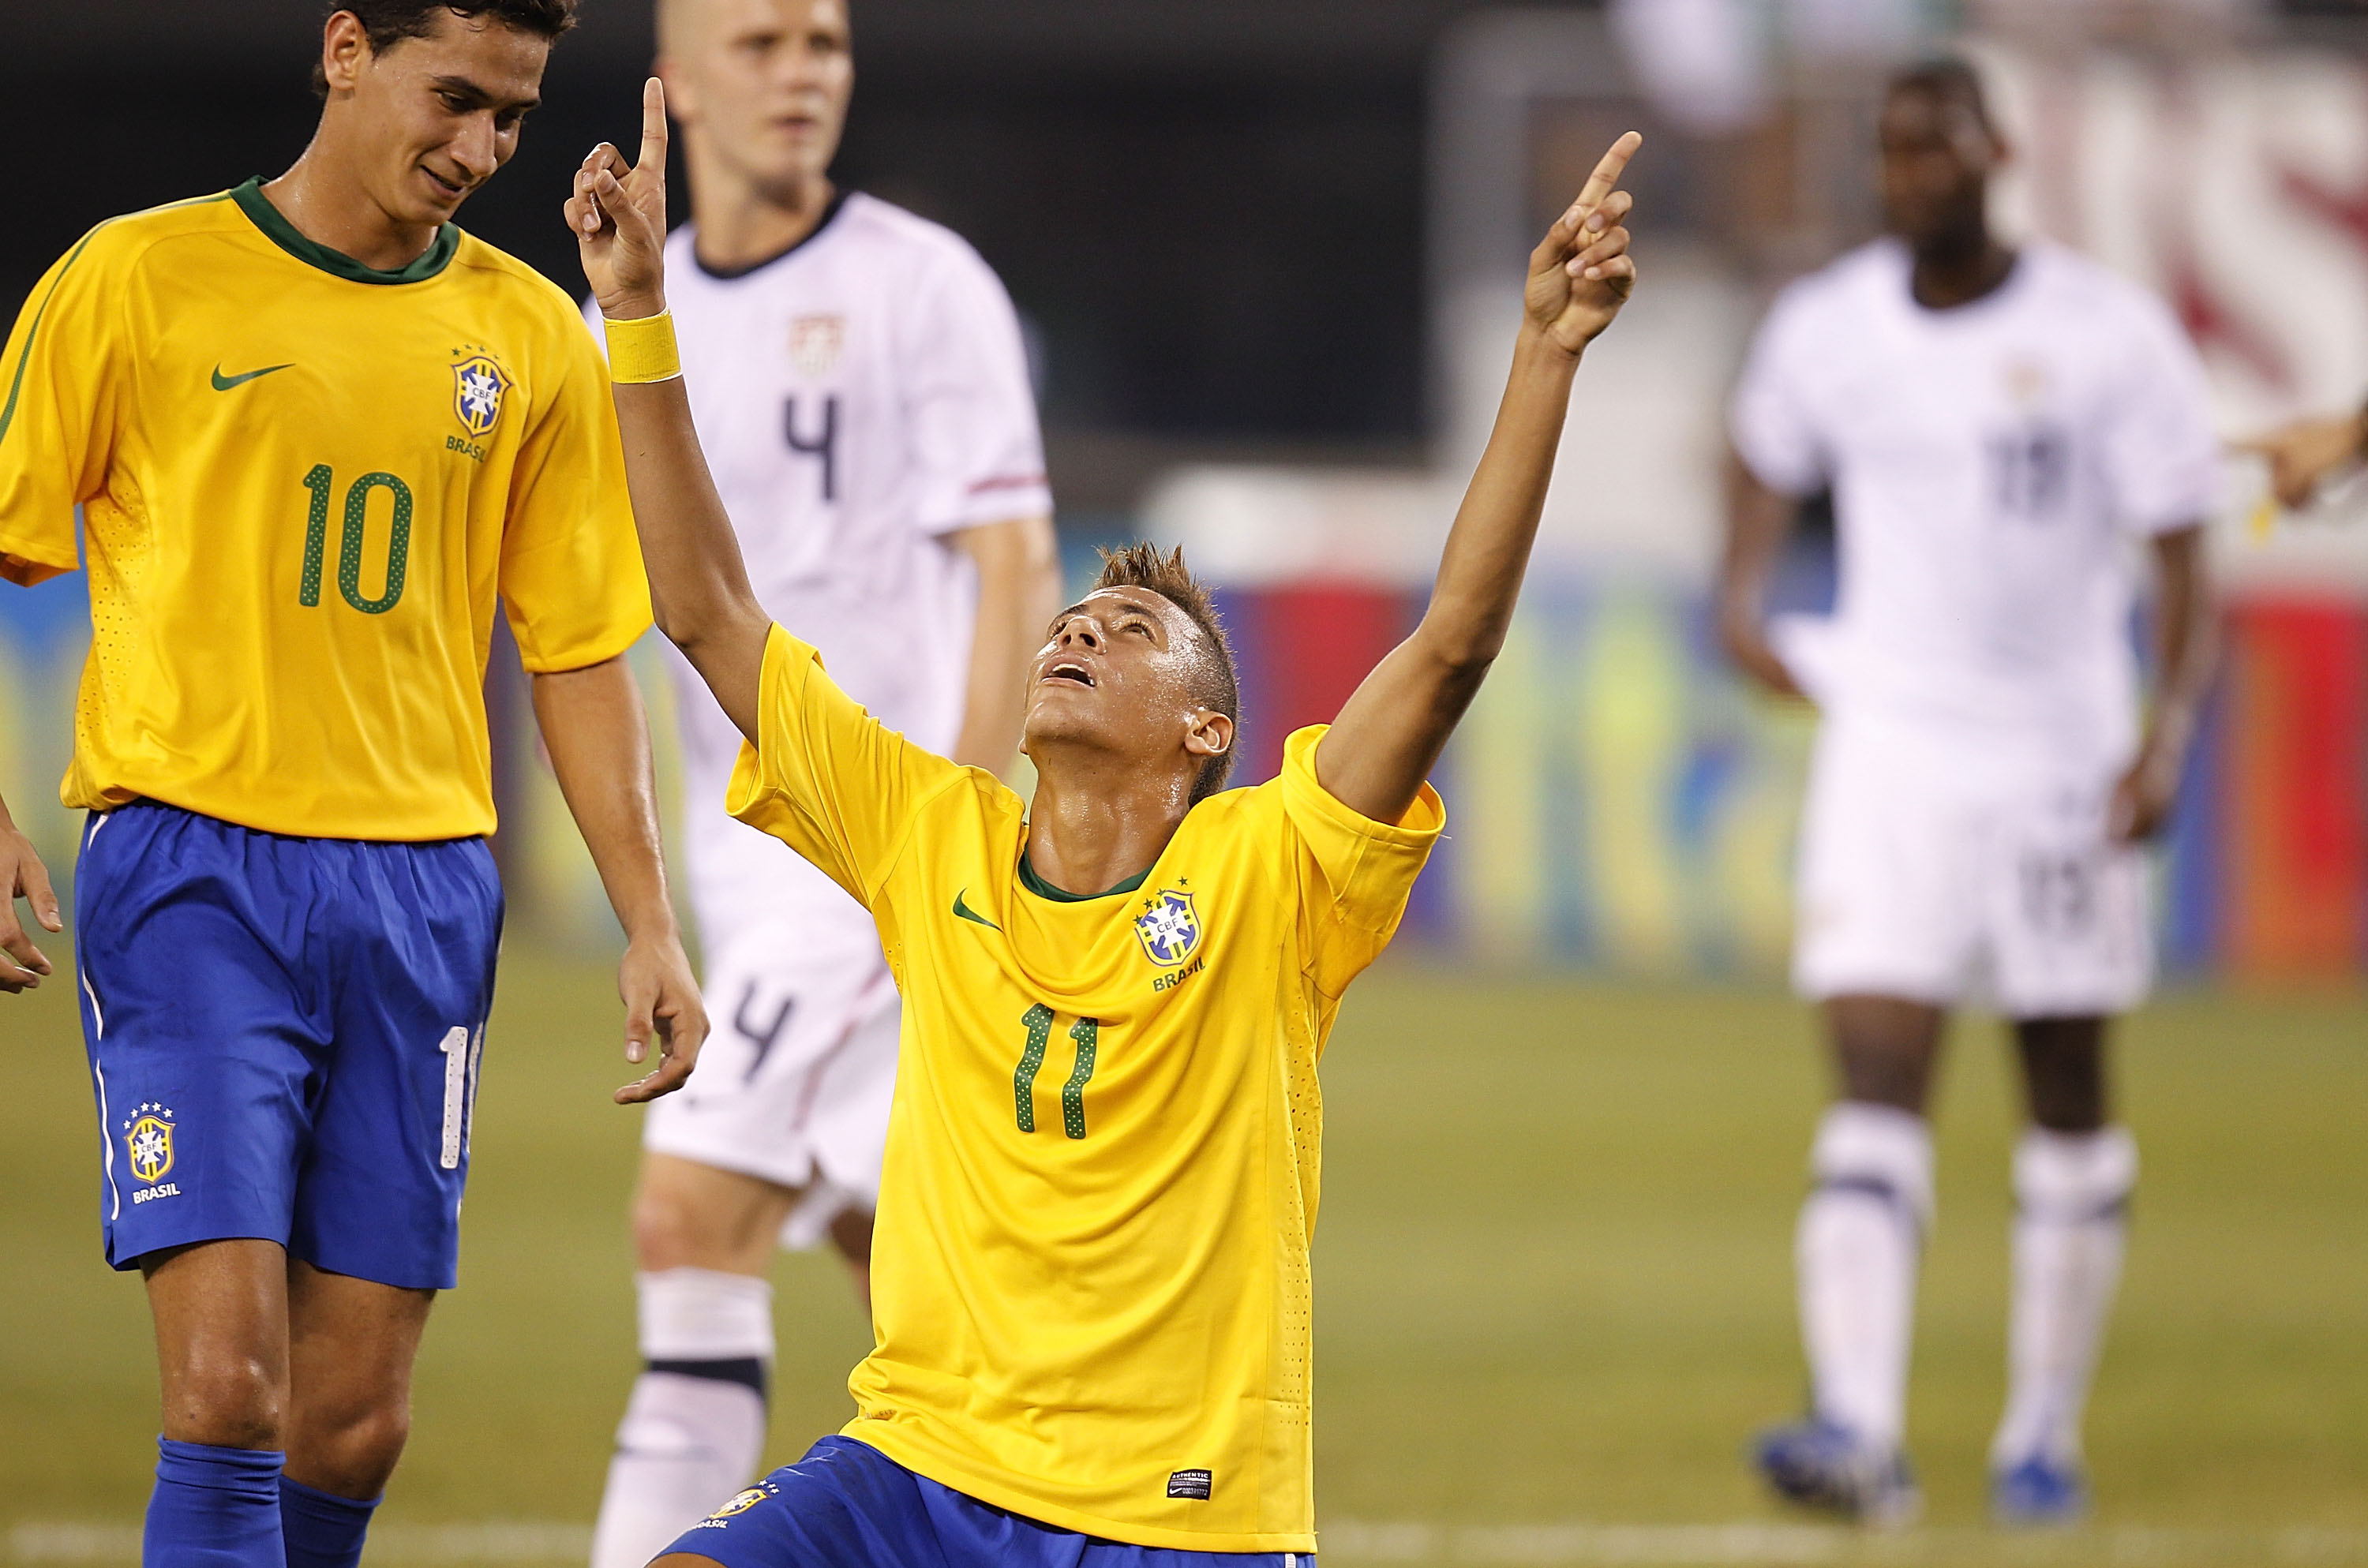 EAST RUTHERFORD, NJ - AUGUST 10:  Neymar #11 and Paulo Henrique Ganso #10 of Brazil celebrate Neymar's goal against the U.S. in the first half of a friendly match at the New Meadowlands on August 10, 2010 in East Rutherford, New Jersey.  (Photo by Jeff Ze